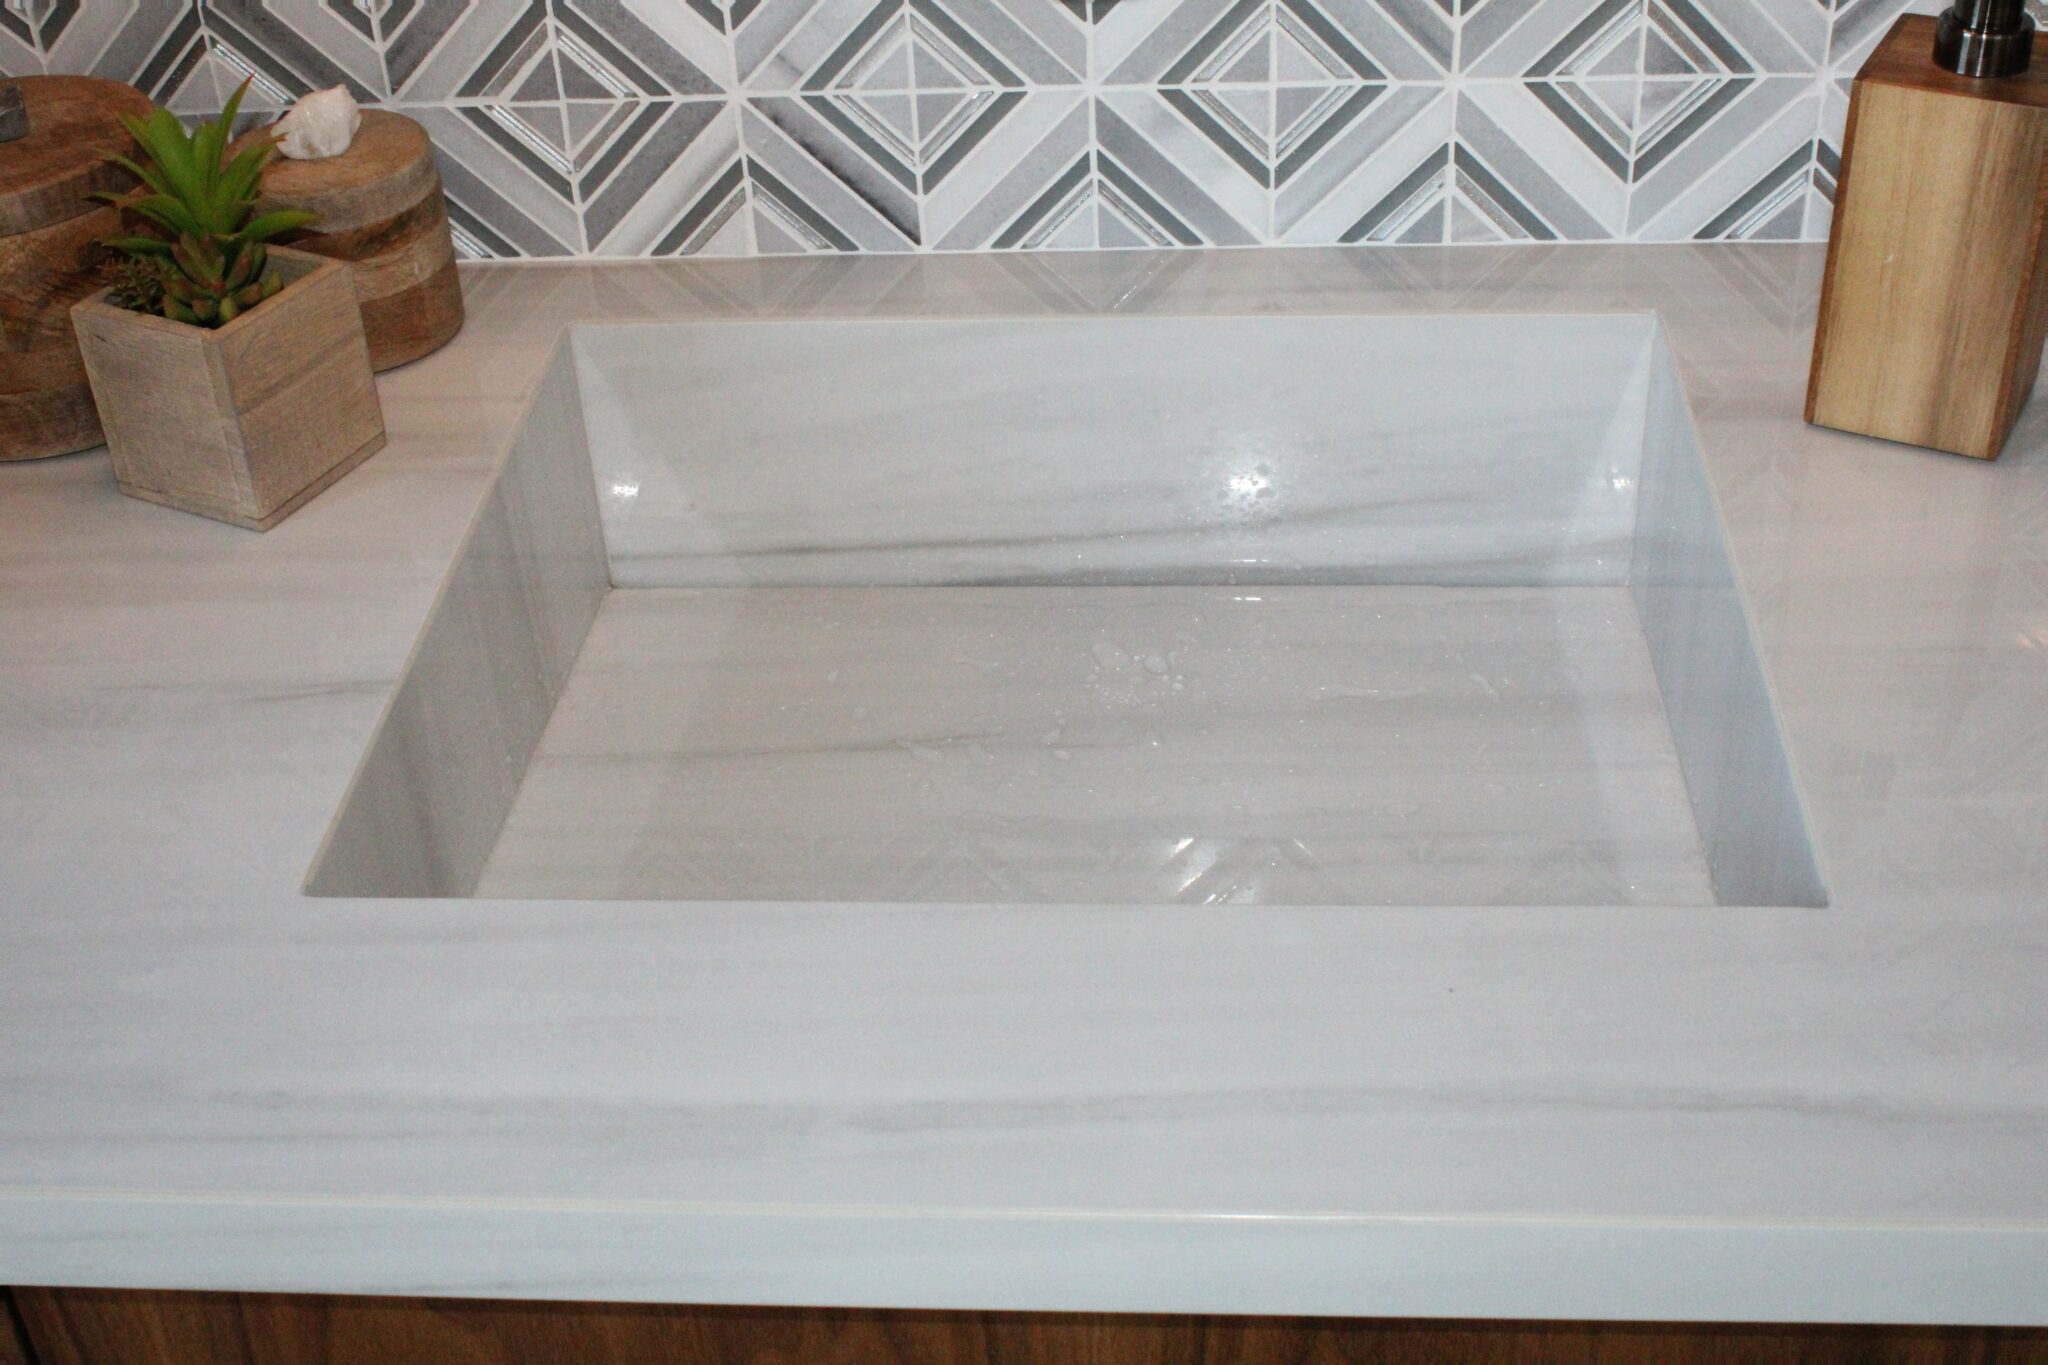 Up close integrated sink made from large format porcelain